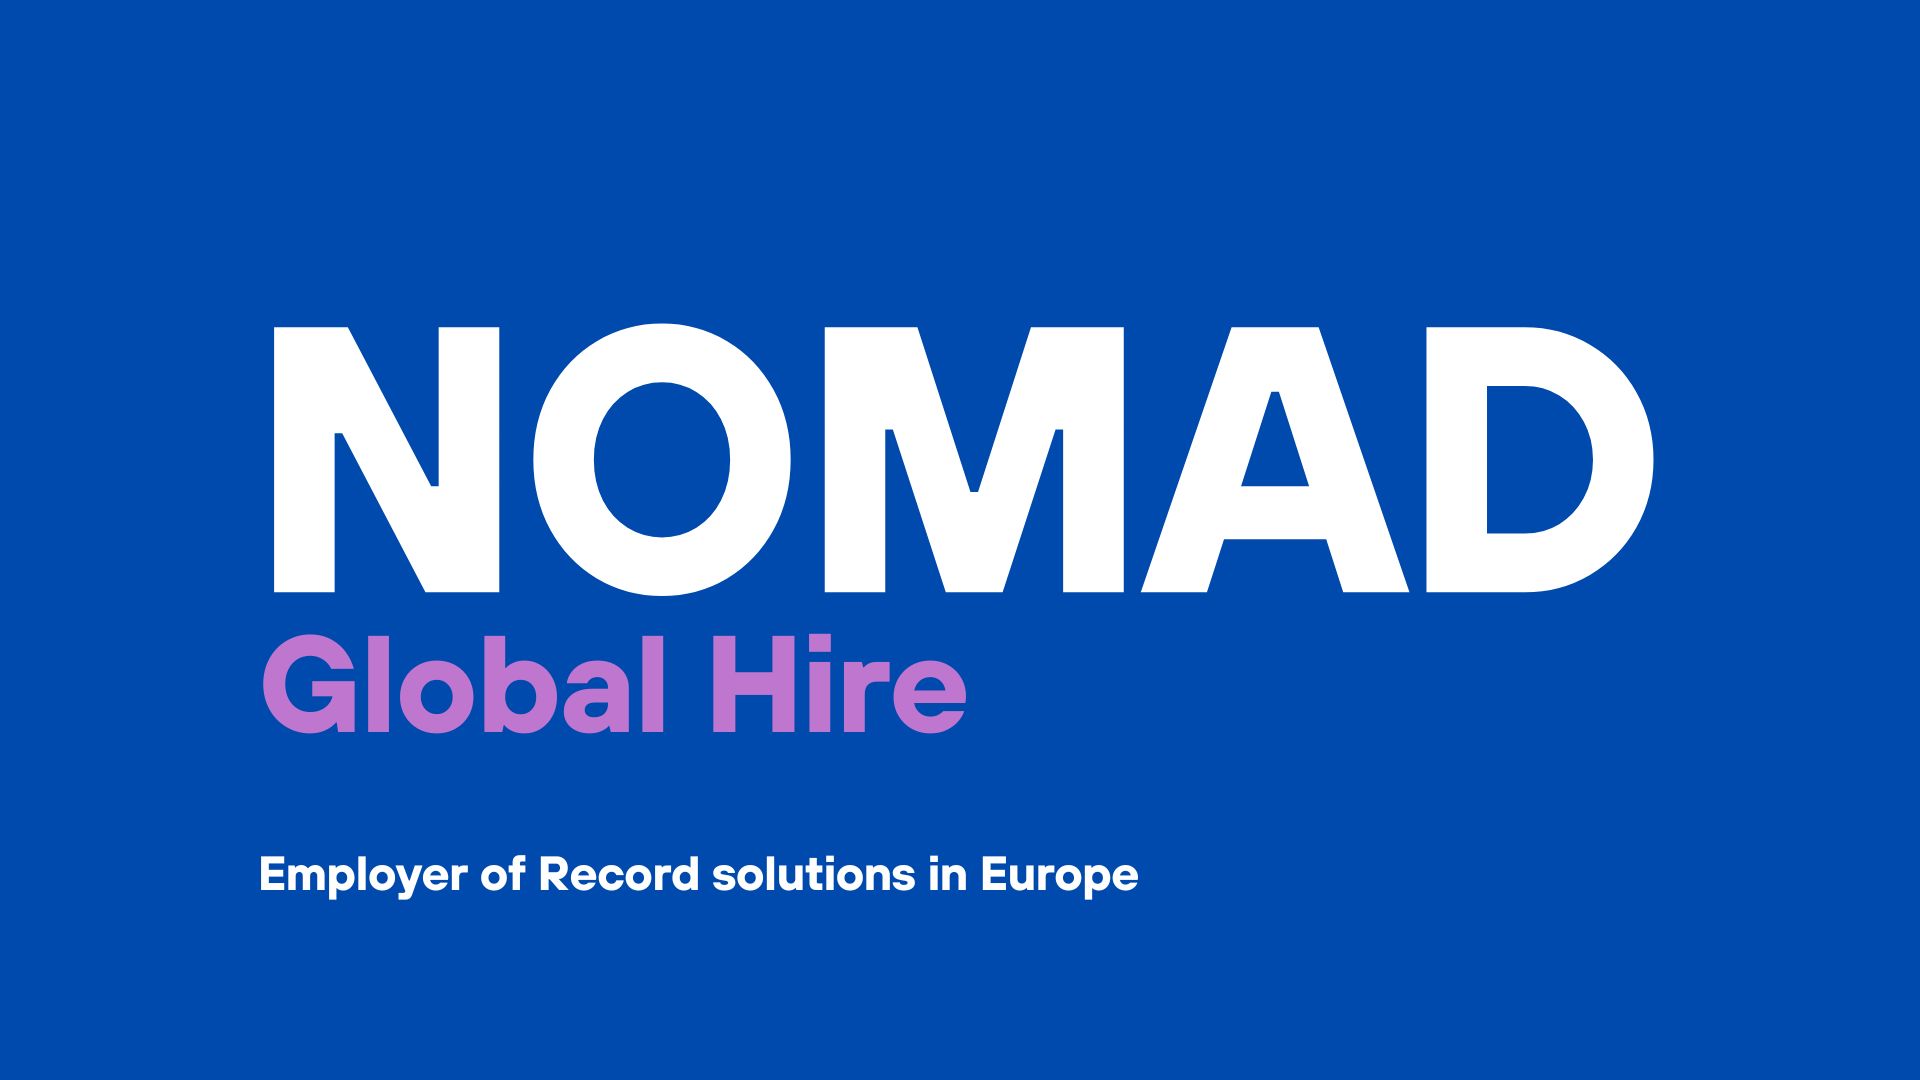 Nomad Global Hire